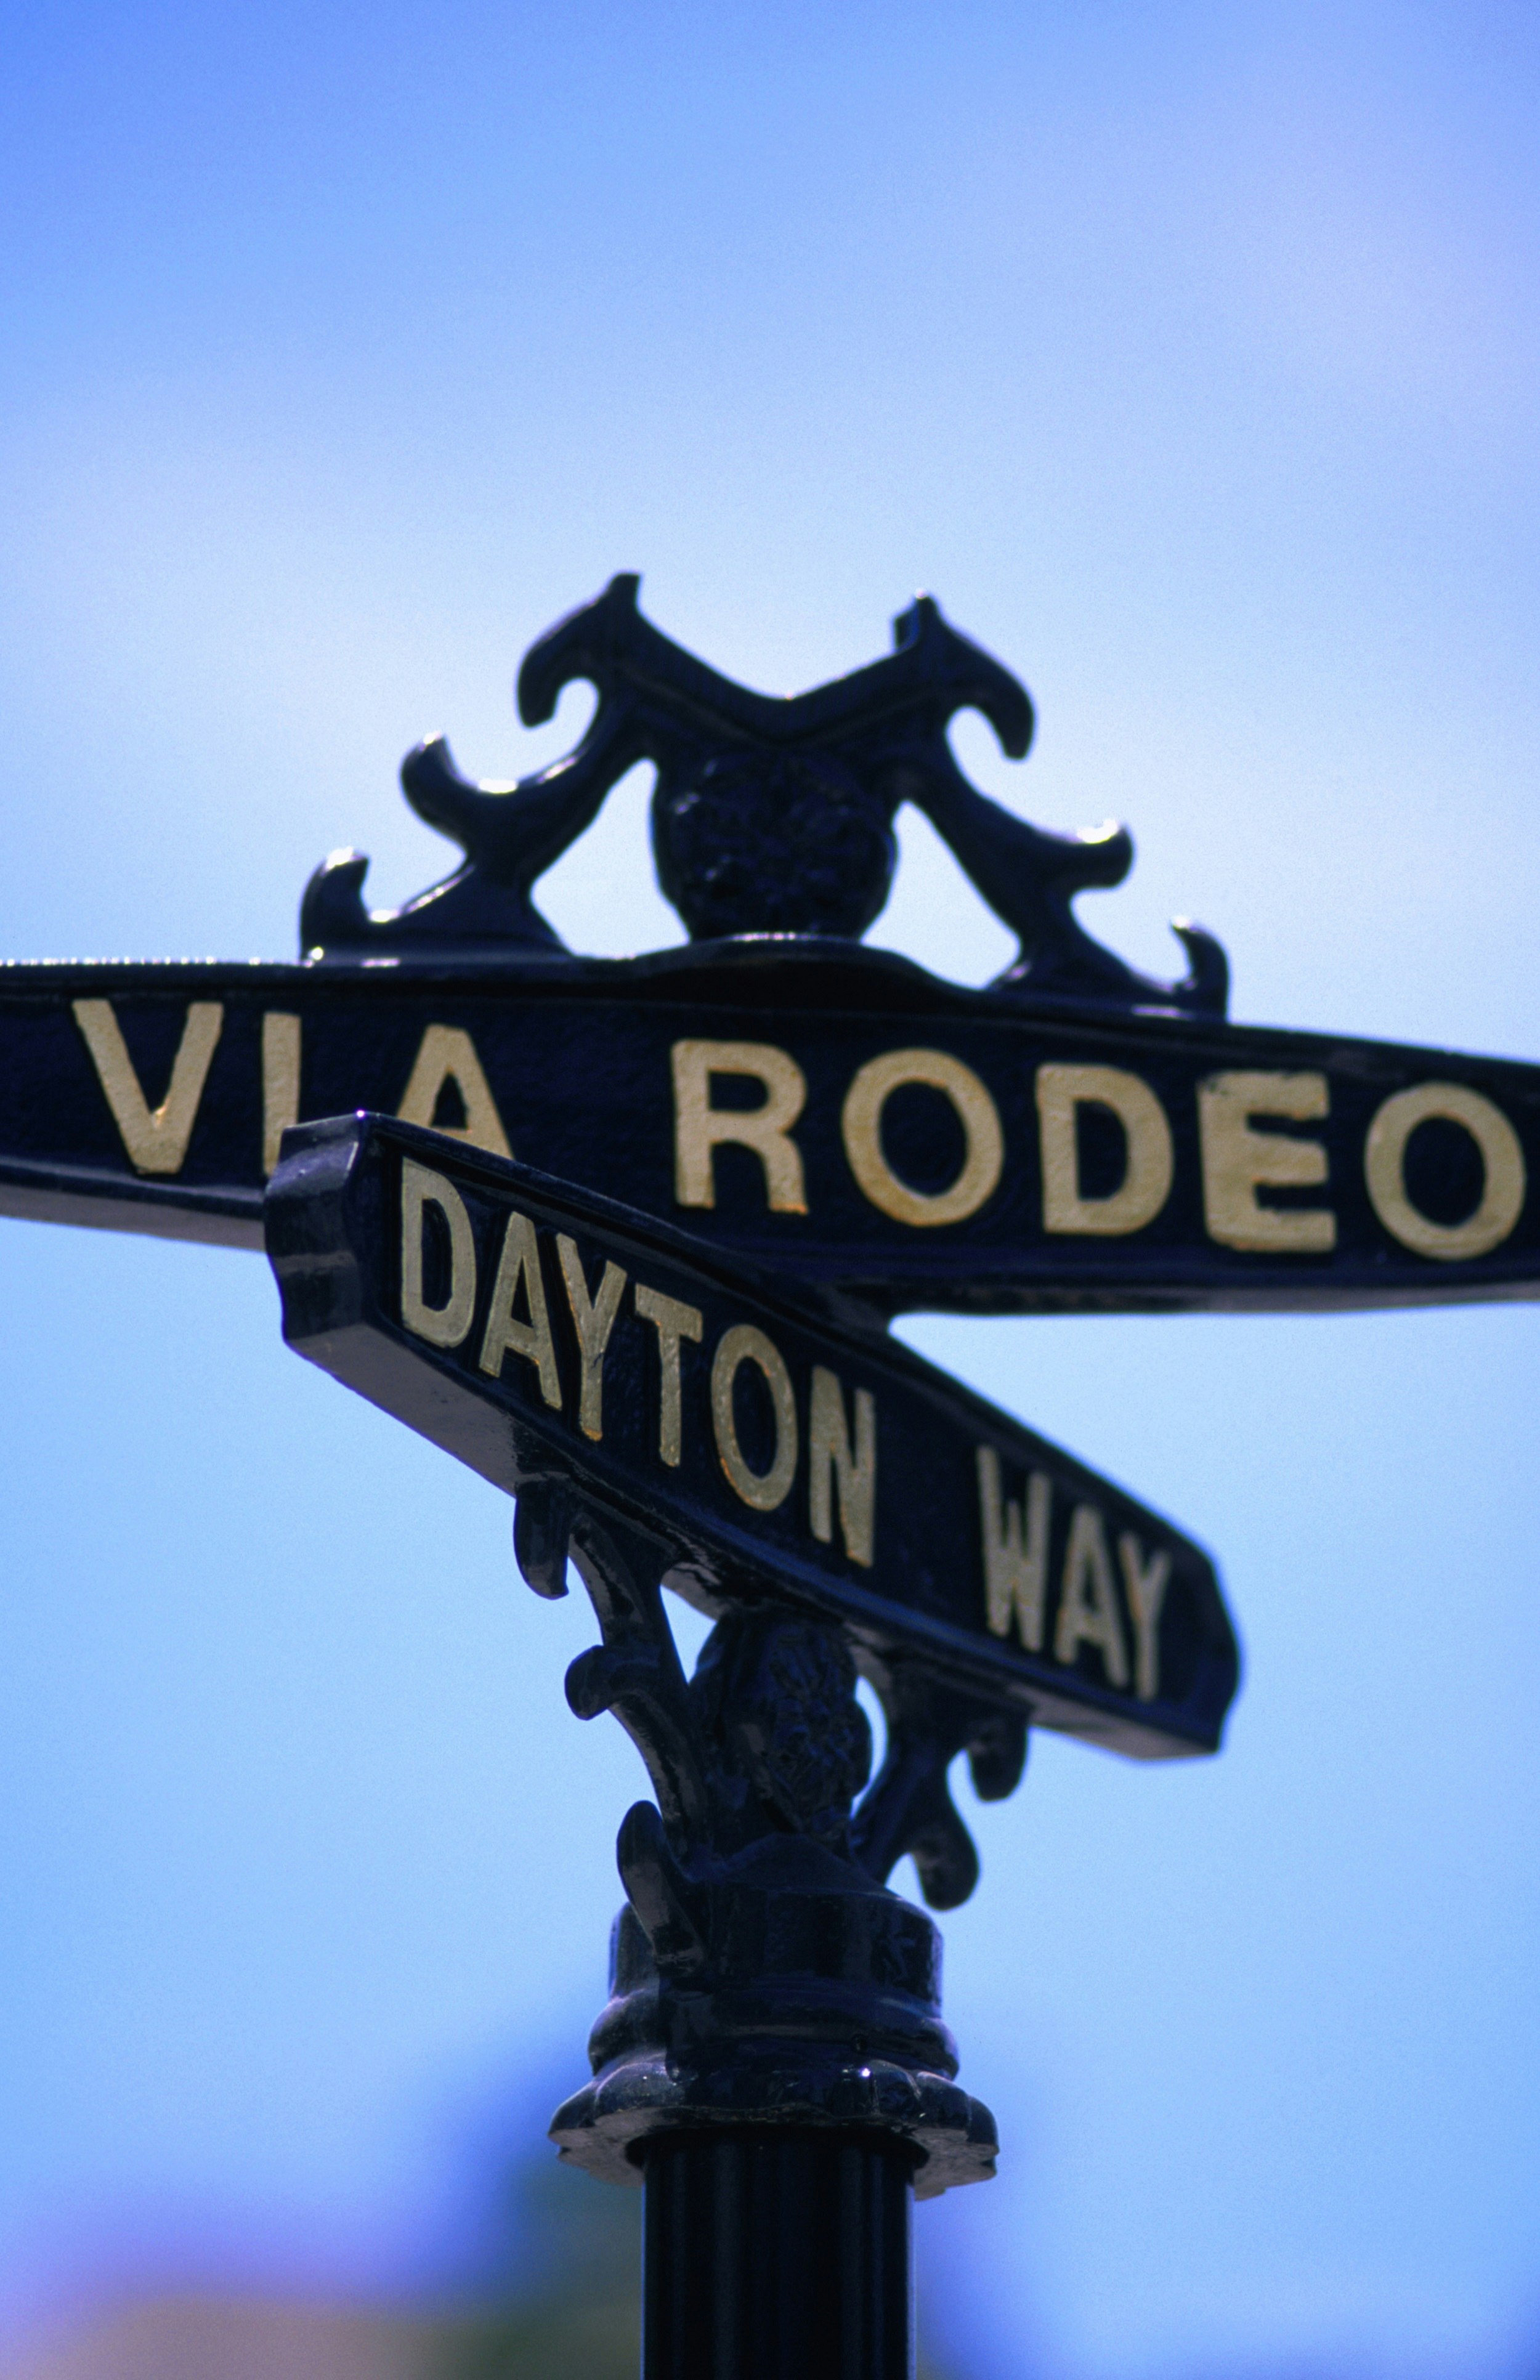 Ornamental bronze street signs for the intersection of Rodeo Drive and Dayton Way.